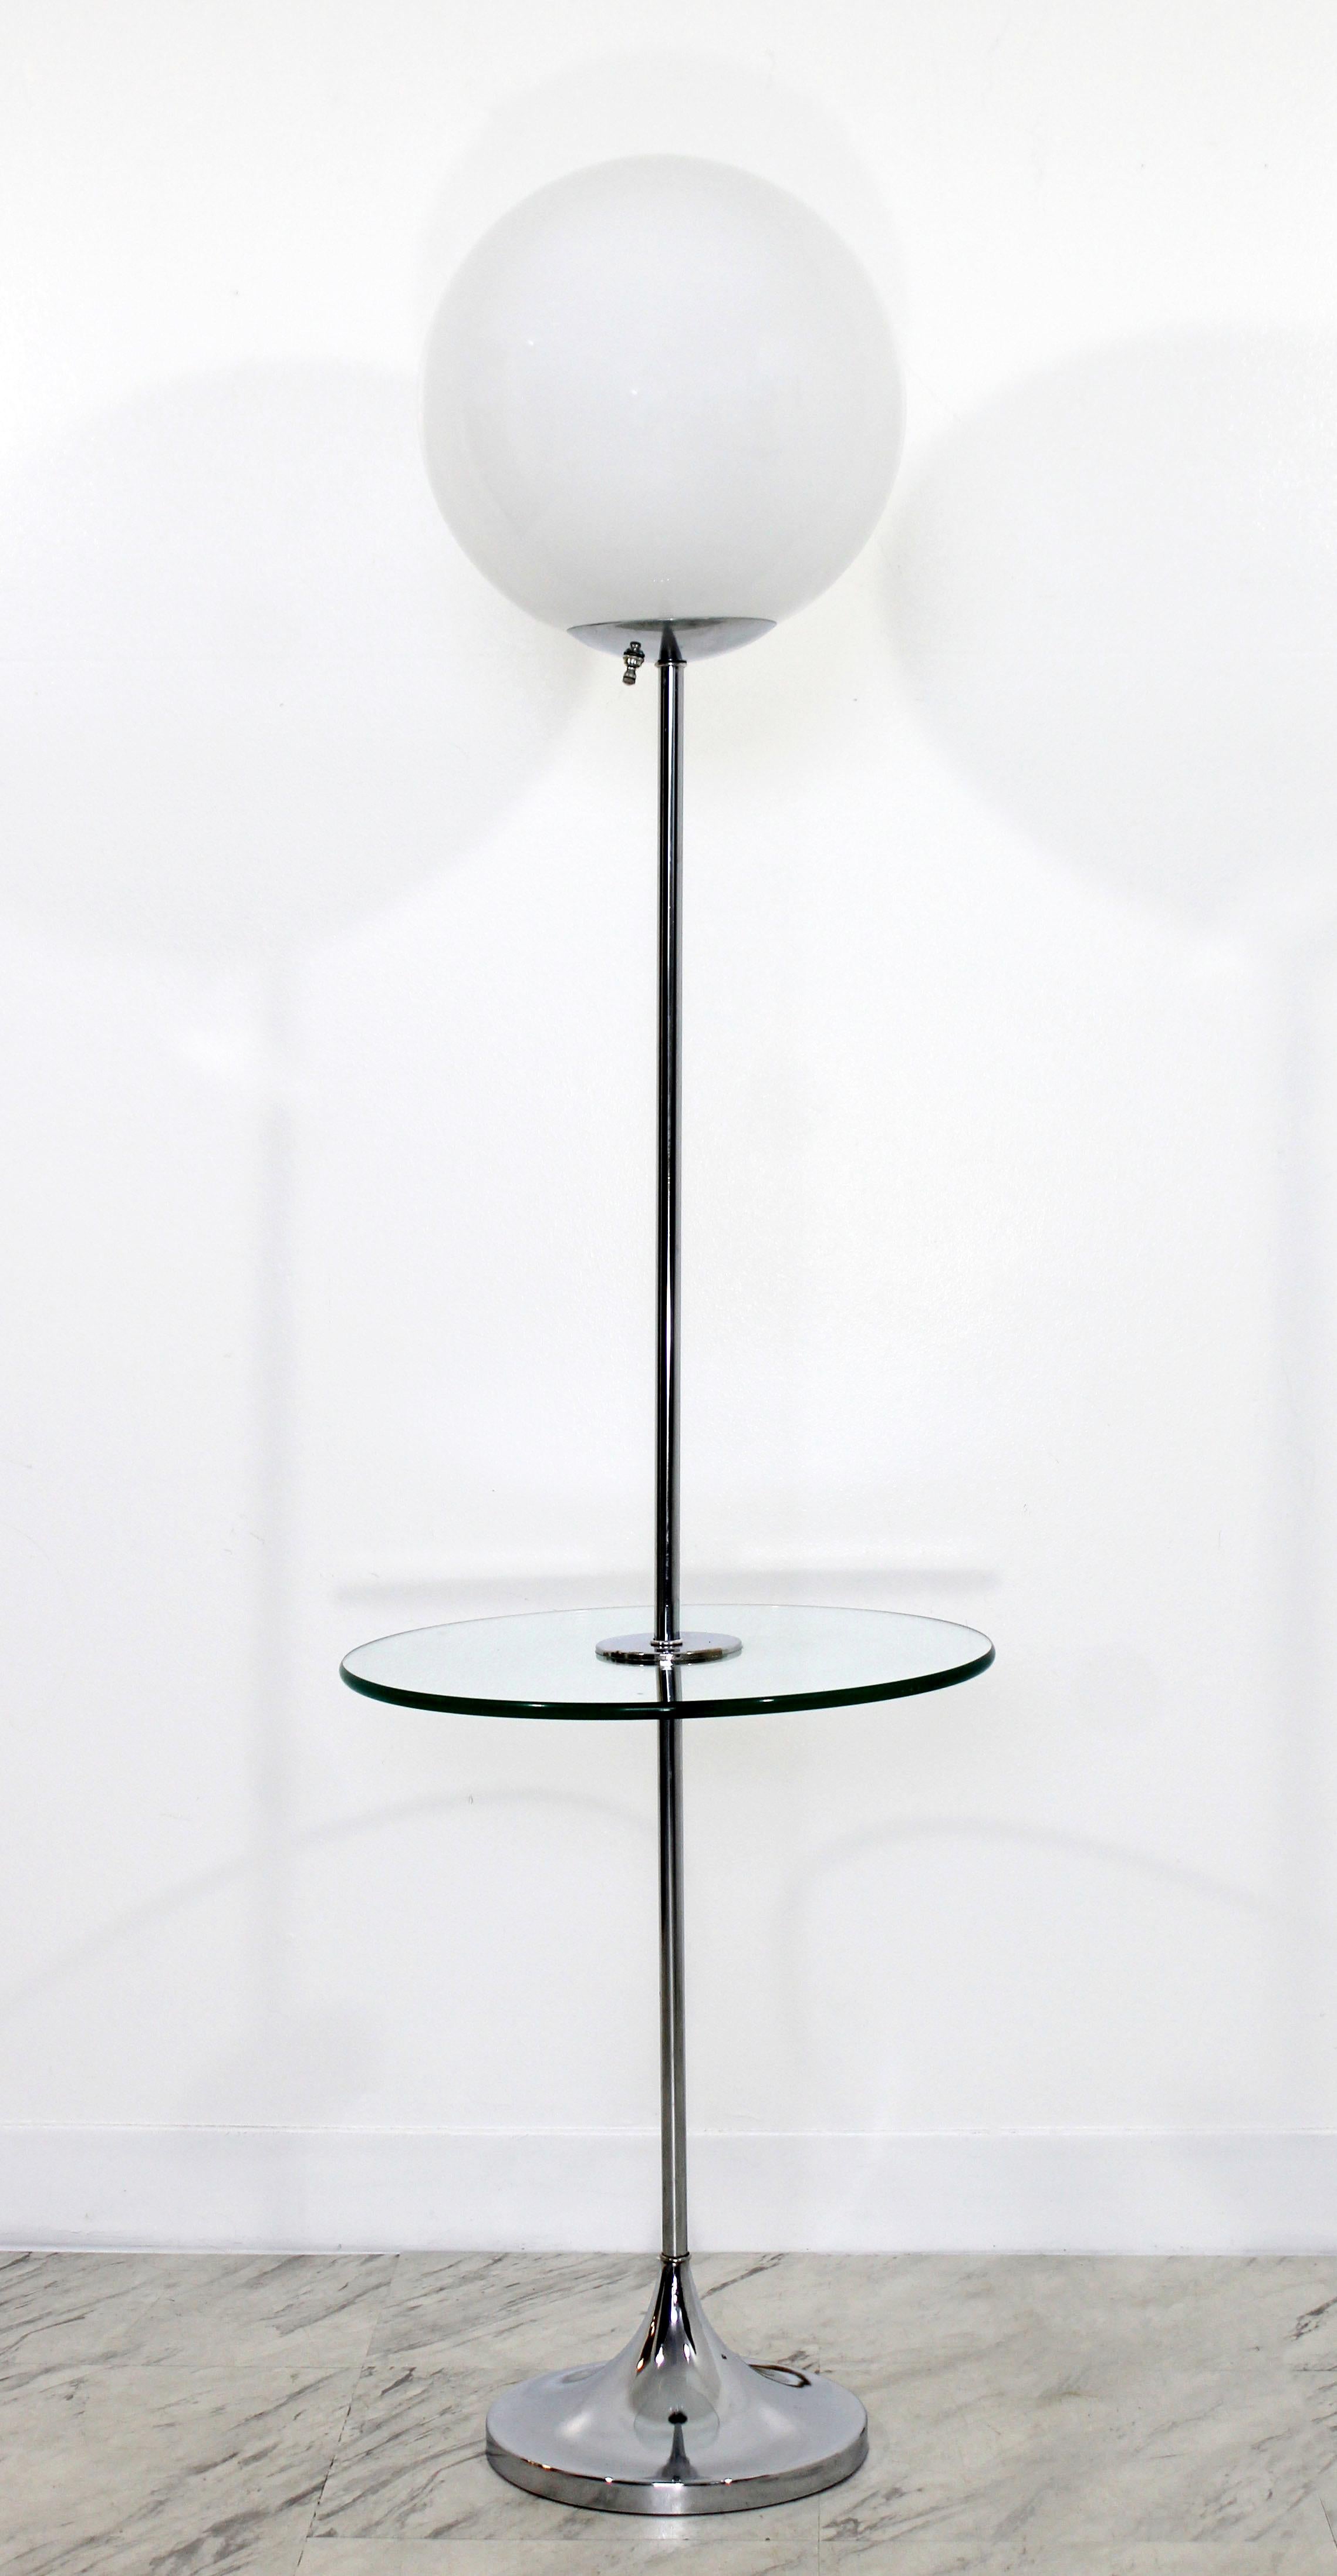 For your consideration is an utterly fabulous, floor lamp table, made of chrome, with a round glass table and glass globe top, in the style of Laurel Lamps, circa the 1970s. In very good condition, with natural patina to chrome. The dimensions 16